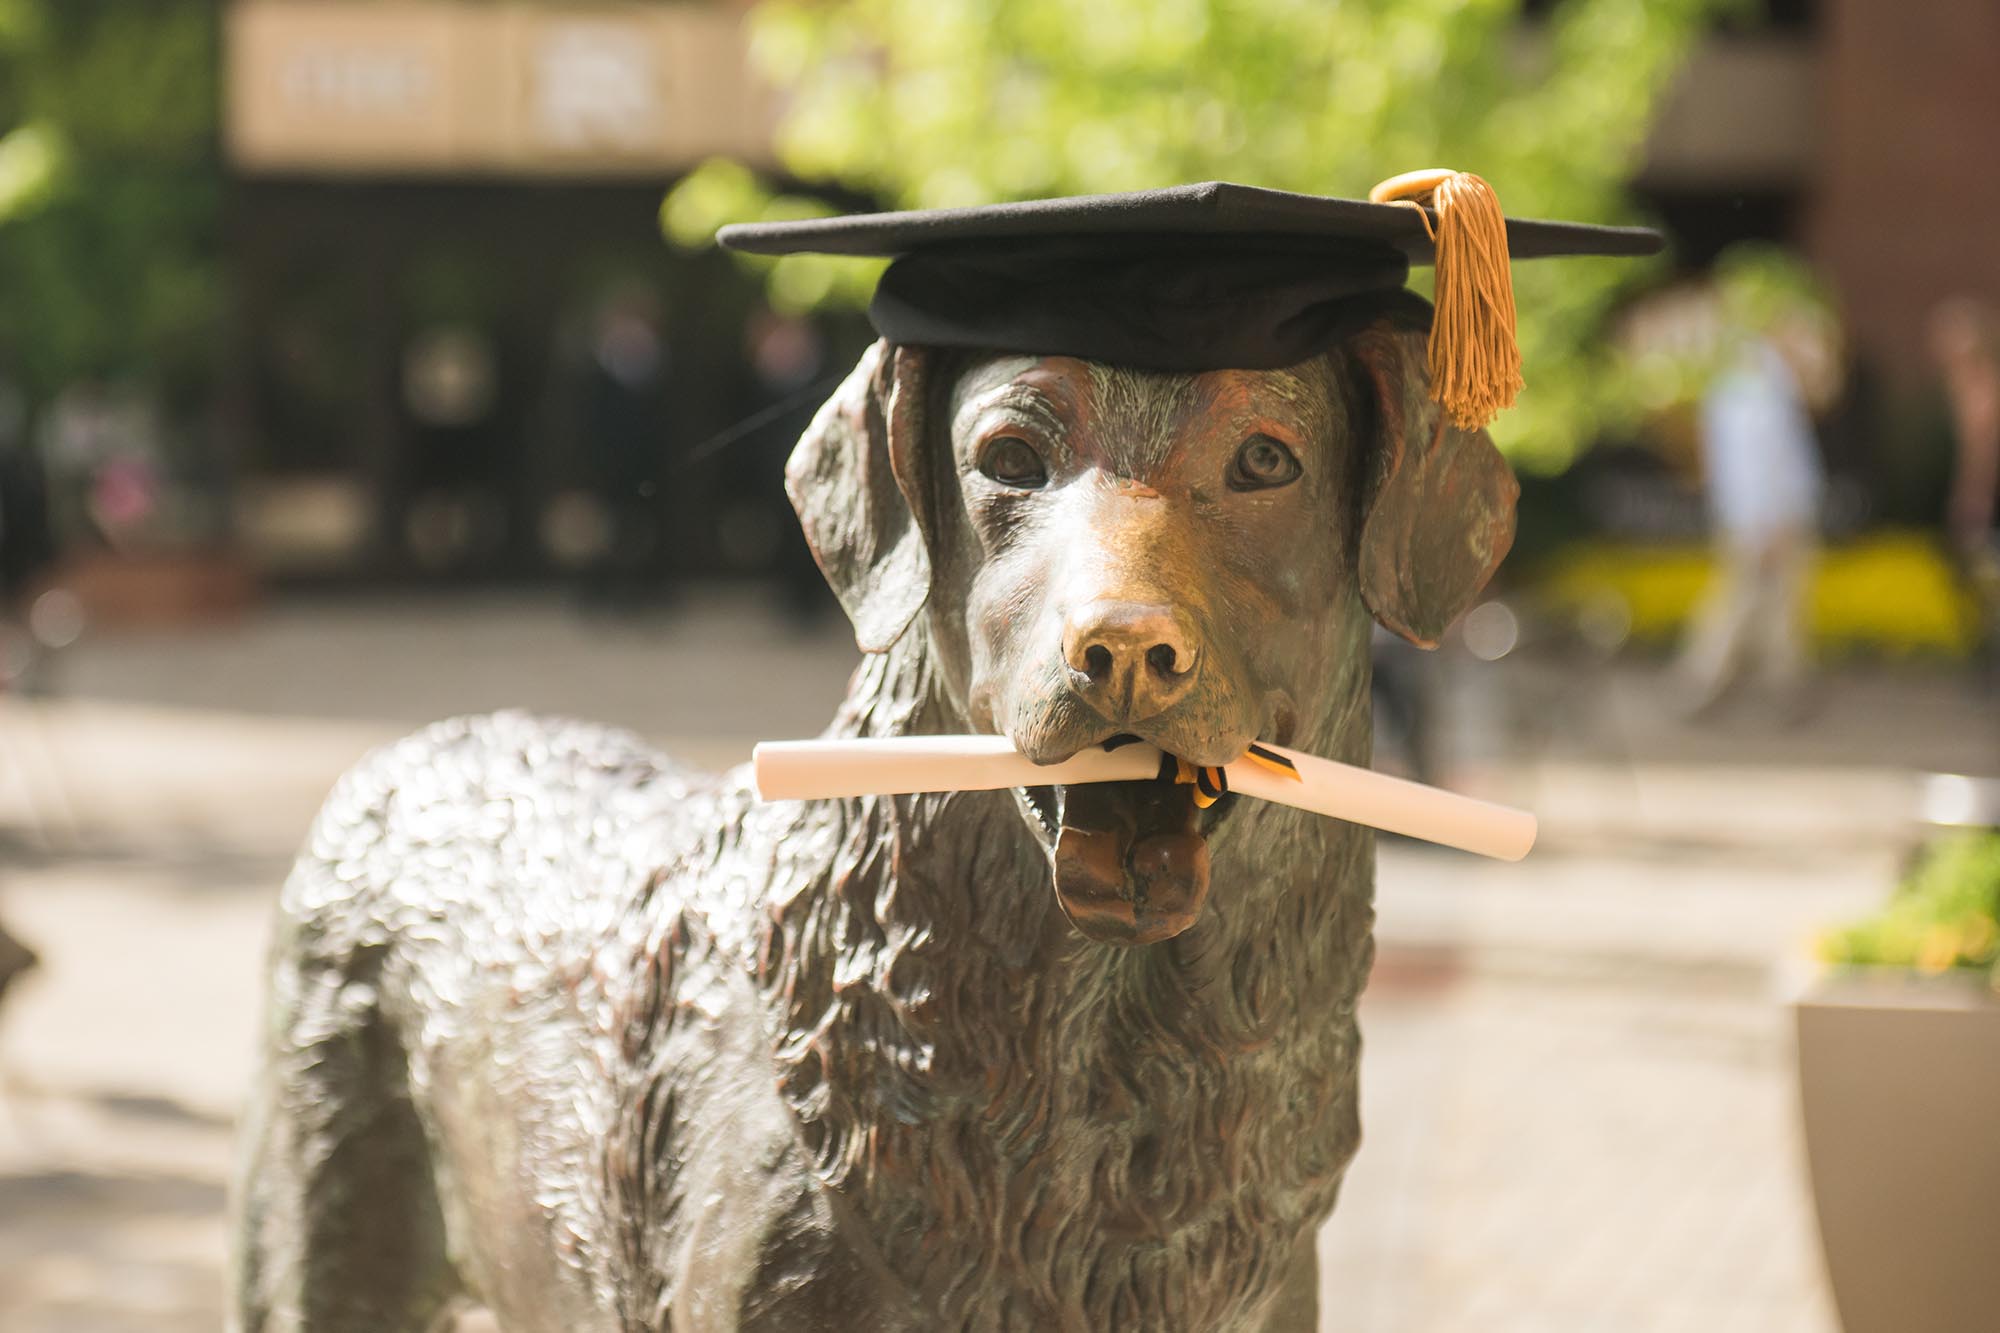 UMBC's Mascot is a Chesapeake Bay Retriever named True Grit. Here is a statue of him, wearing a graduation cap and diploma.